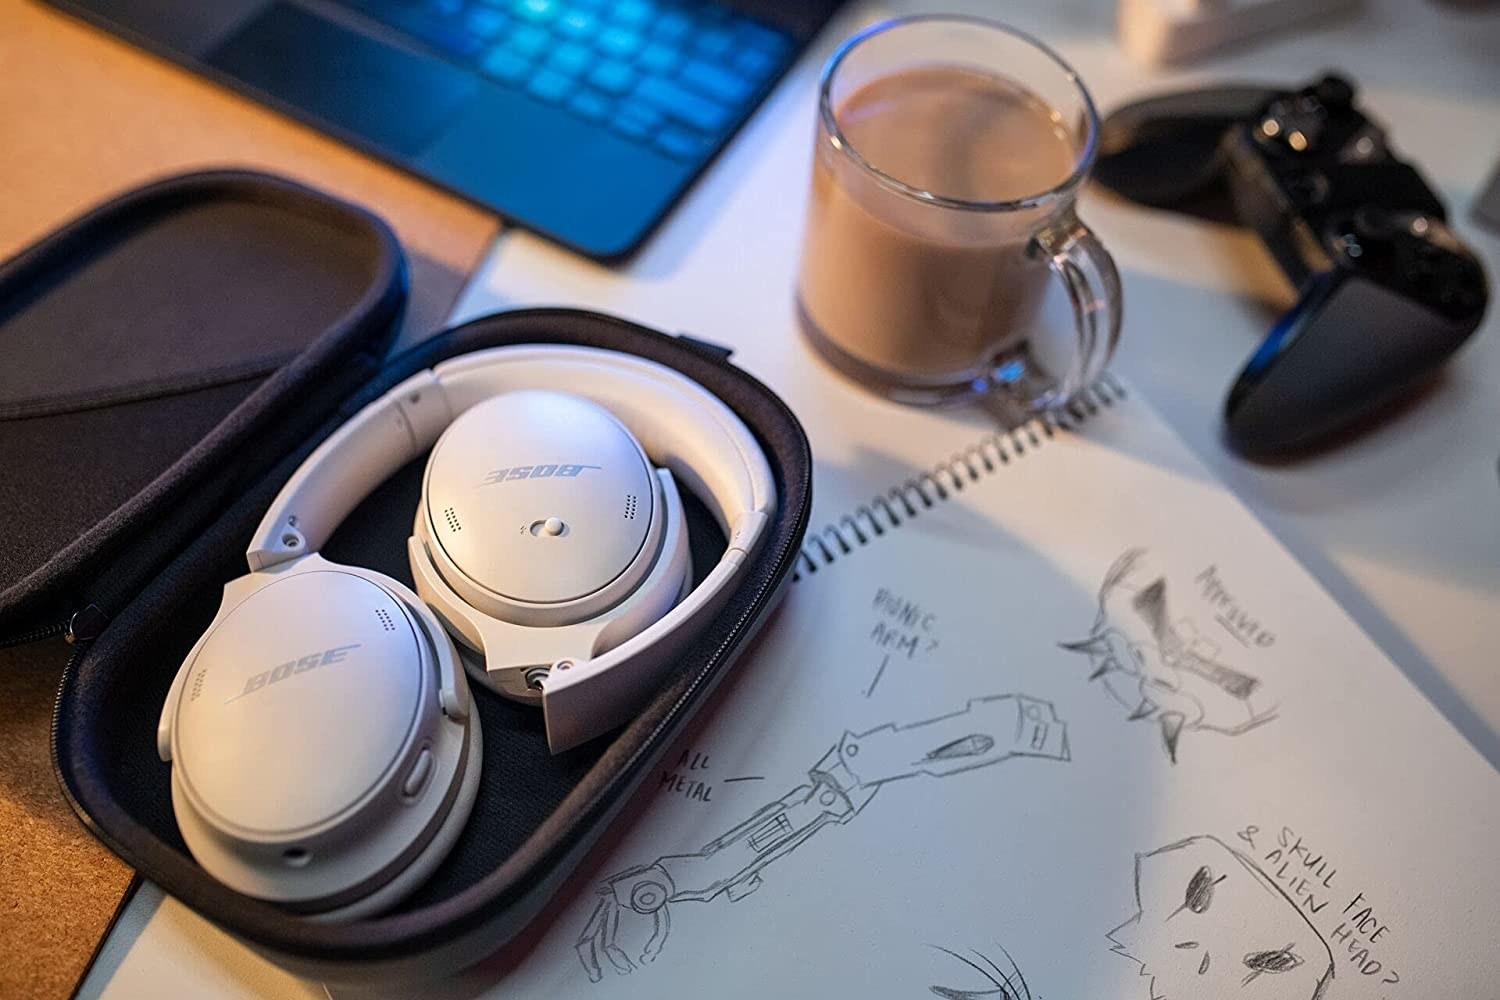 the white bose headphones in their case on a desk